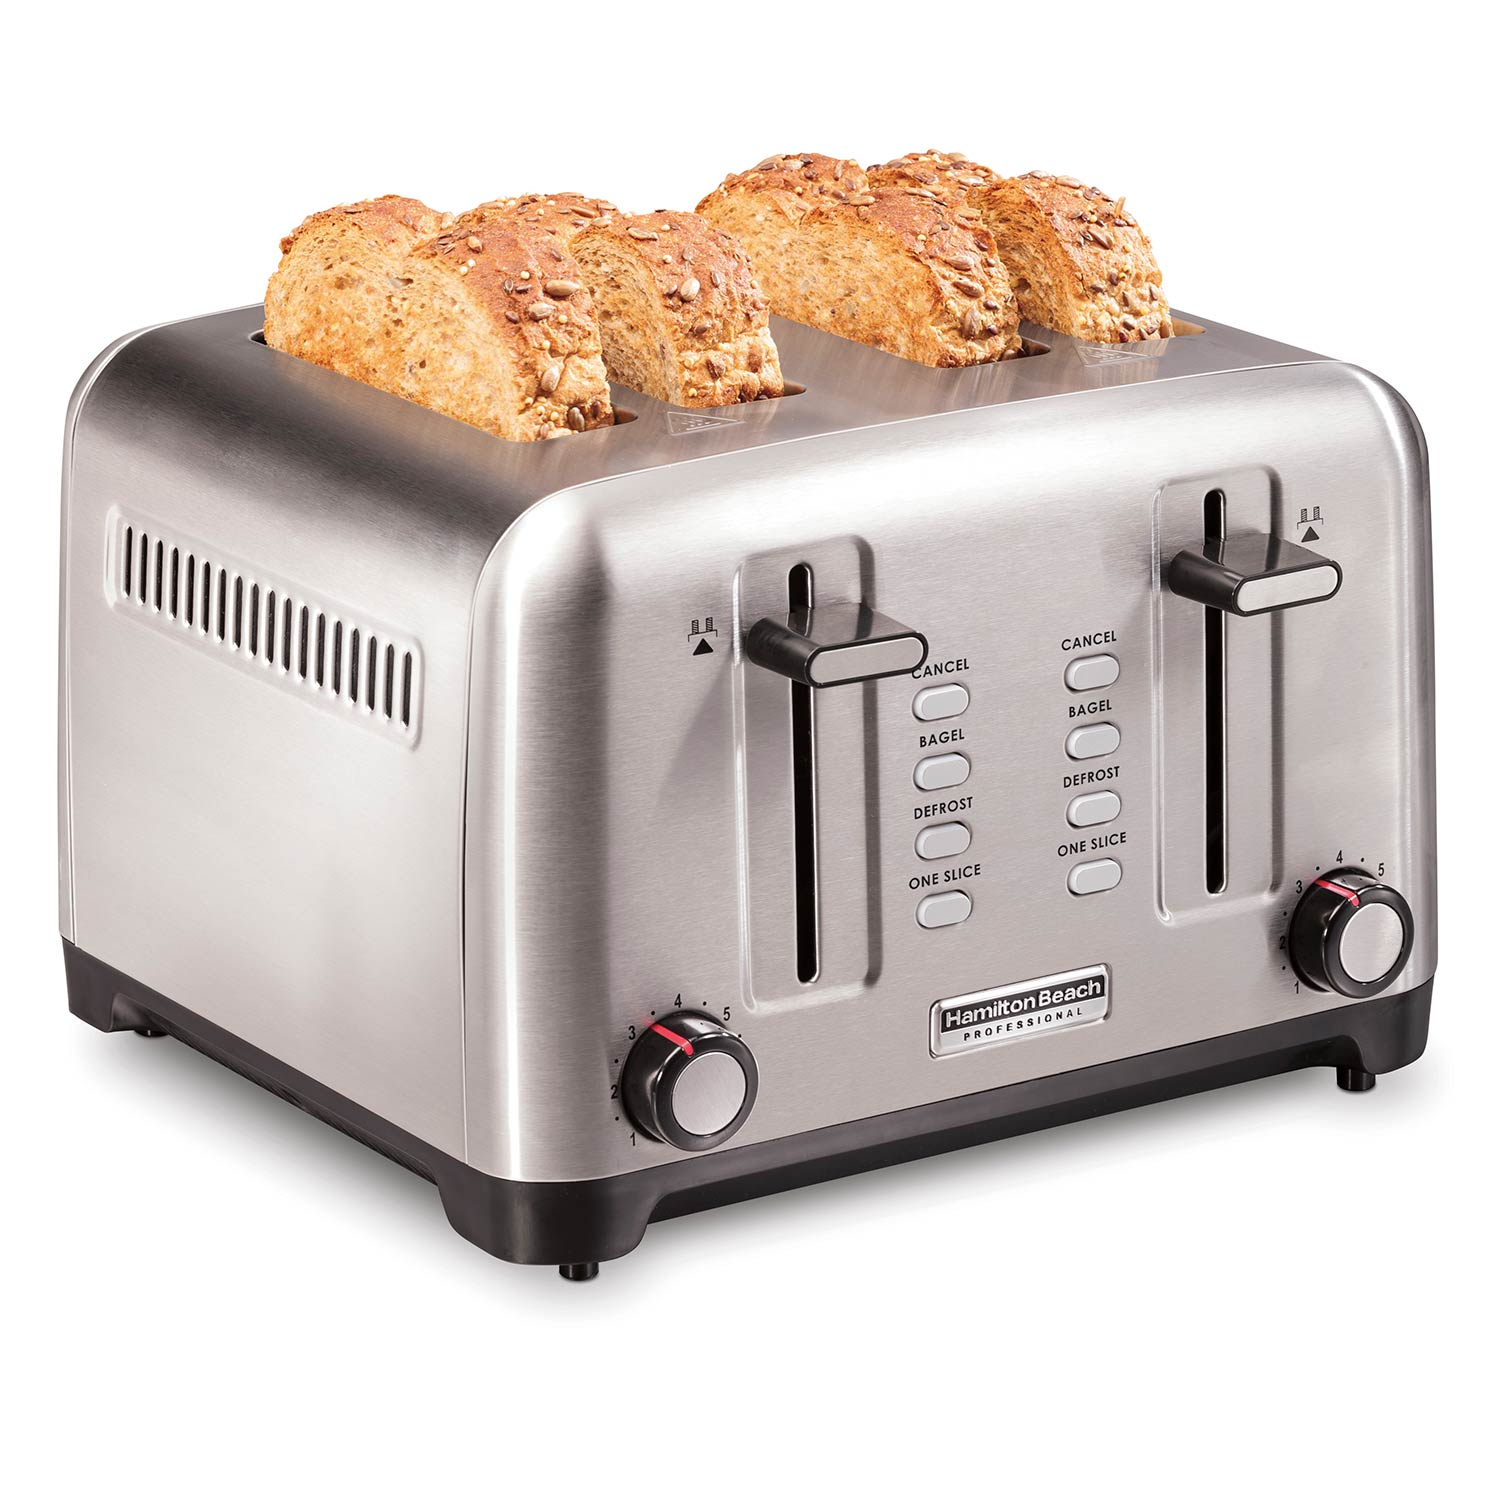 Professional Sure-Toast<sup>™</sup> Pro 4 Slice Toaster, Deep & Wide Slots with Sure-Toast Technology (24991)